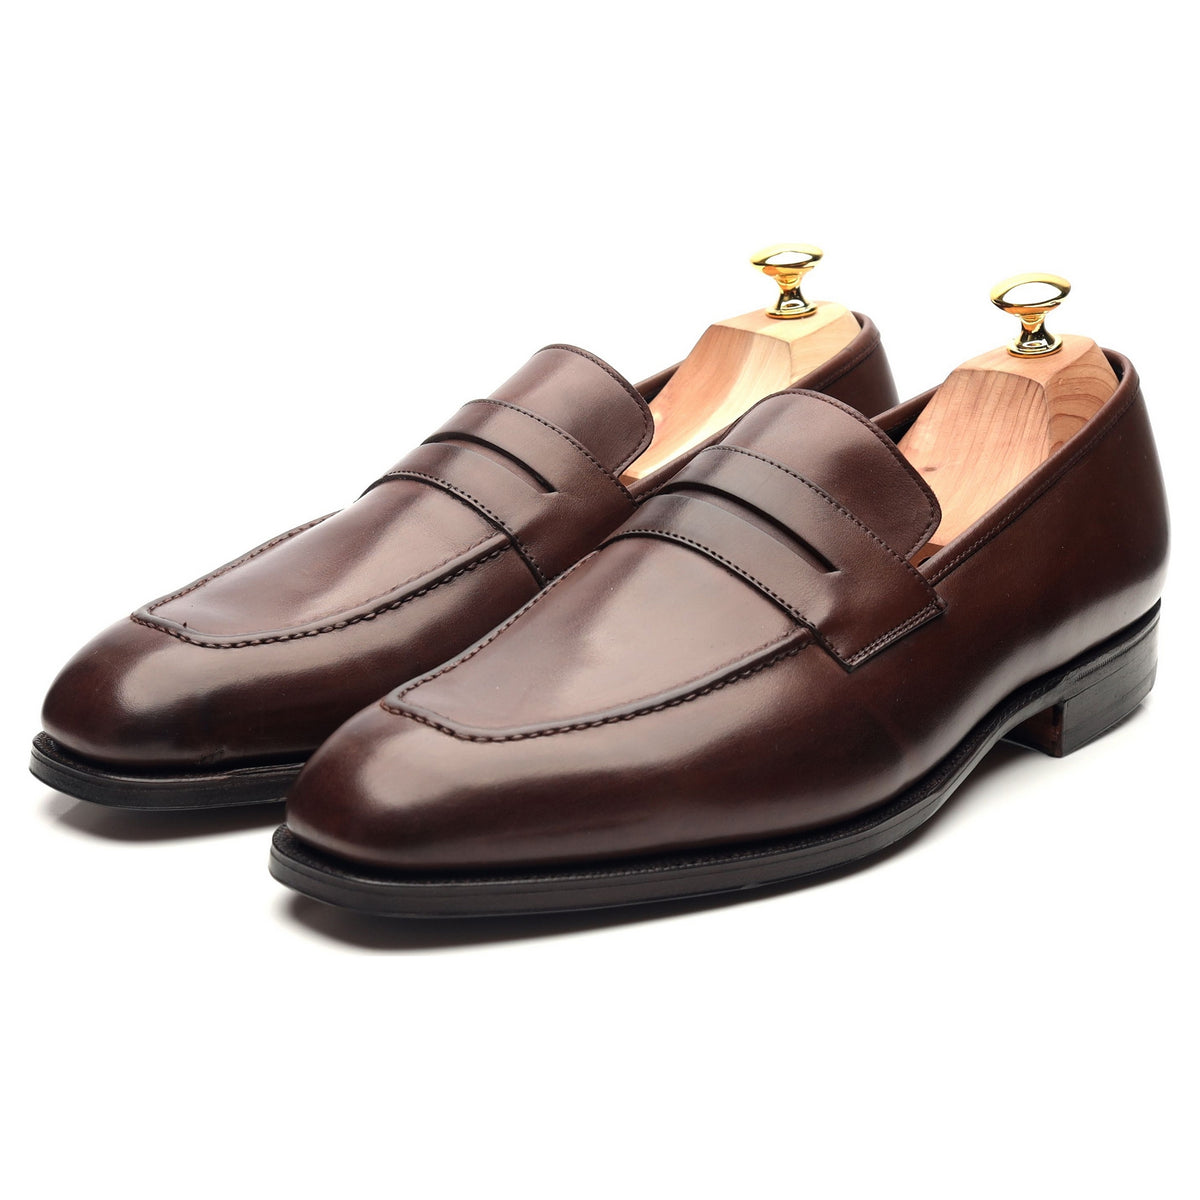 Dark Brown Leather Loafers UK 11.5 E